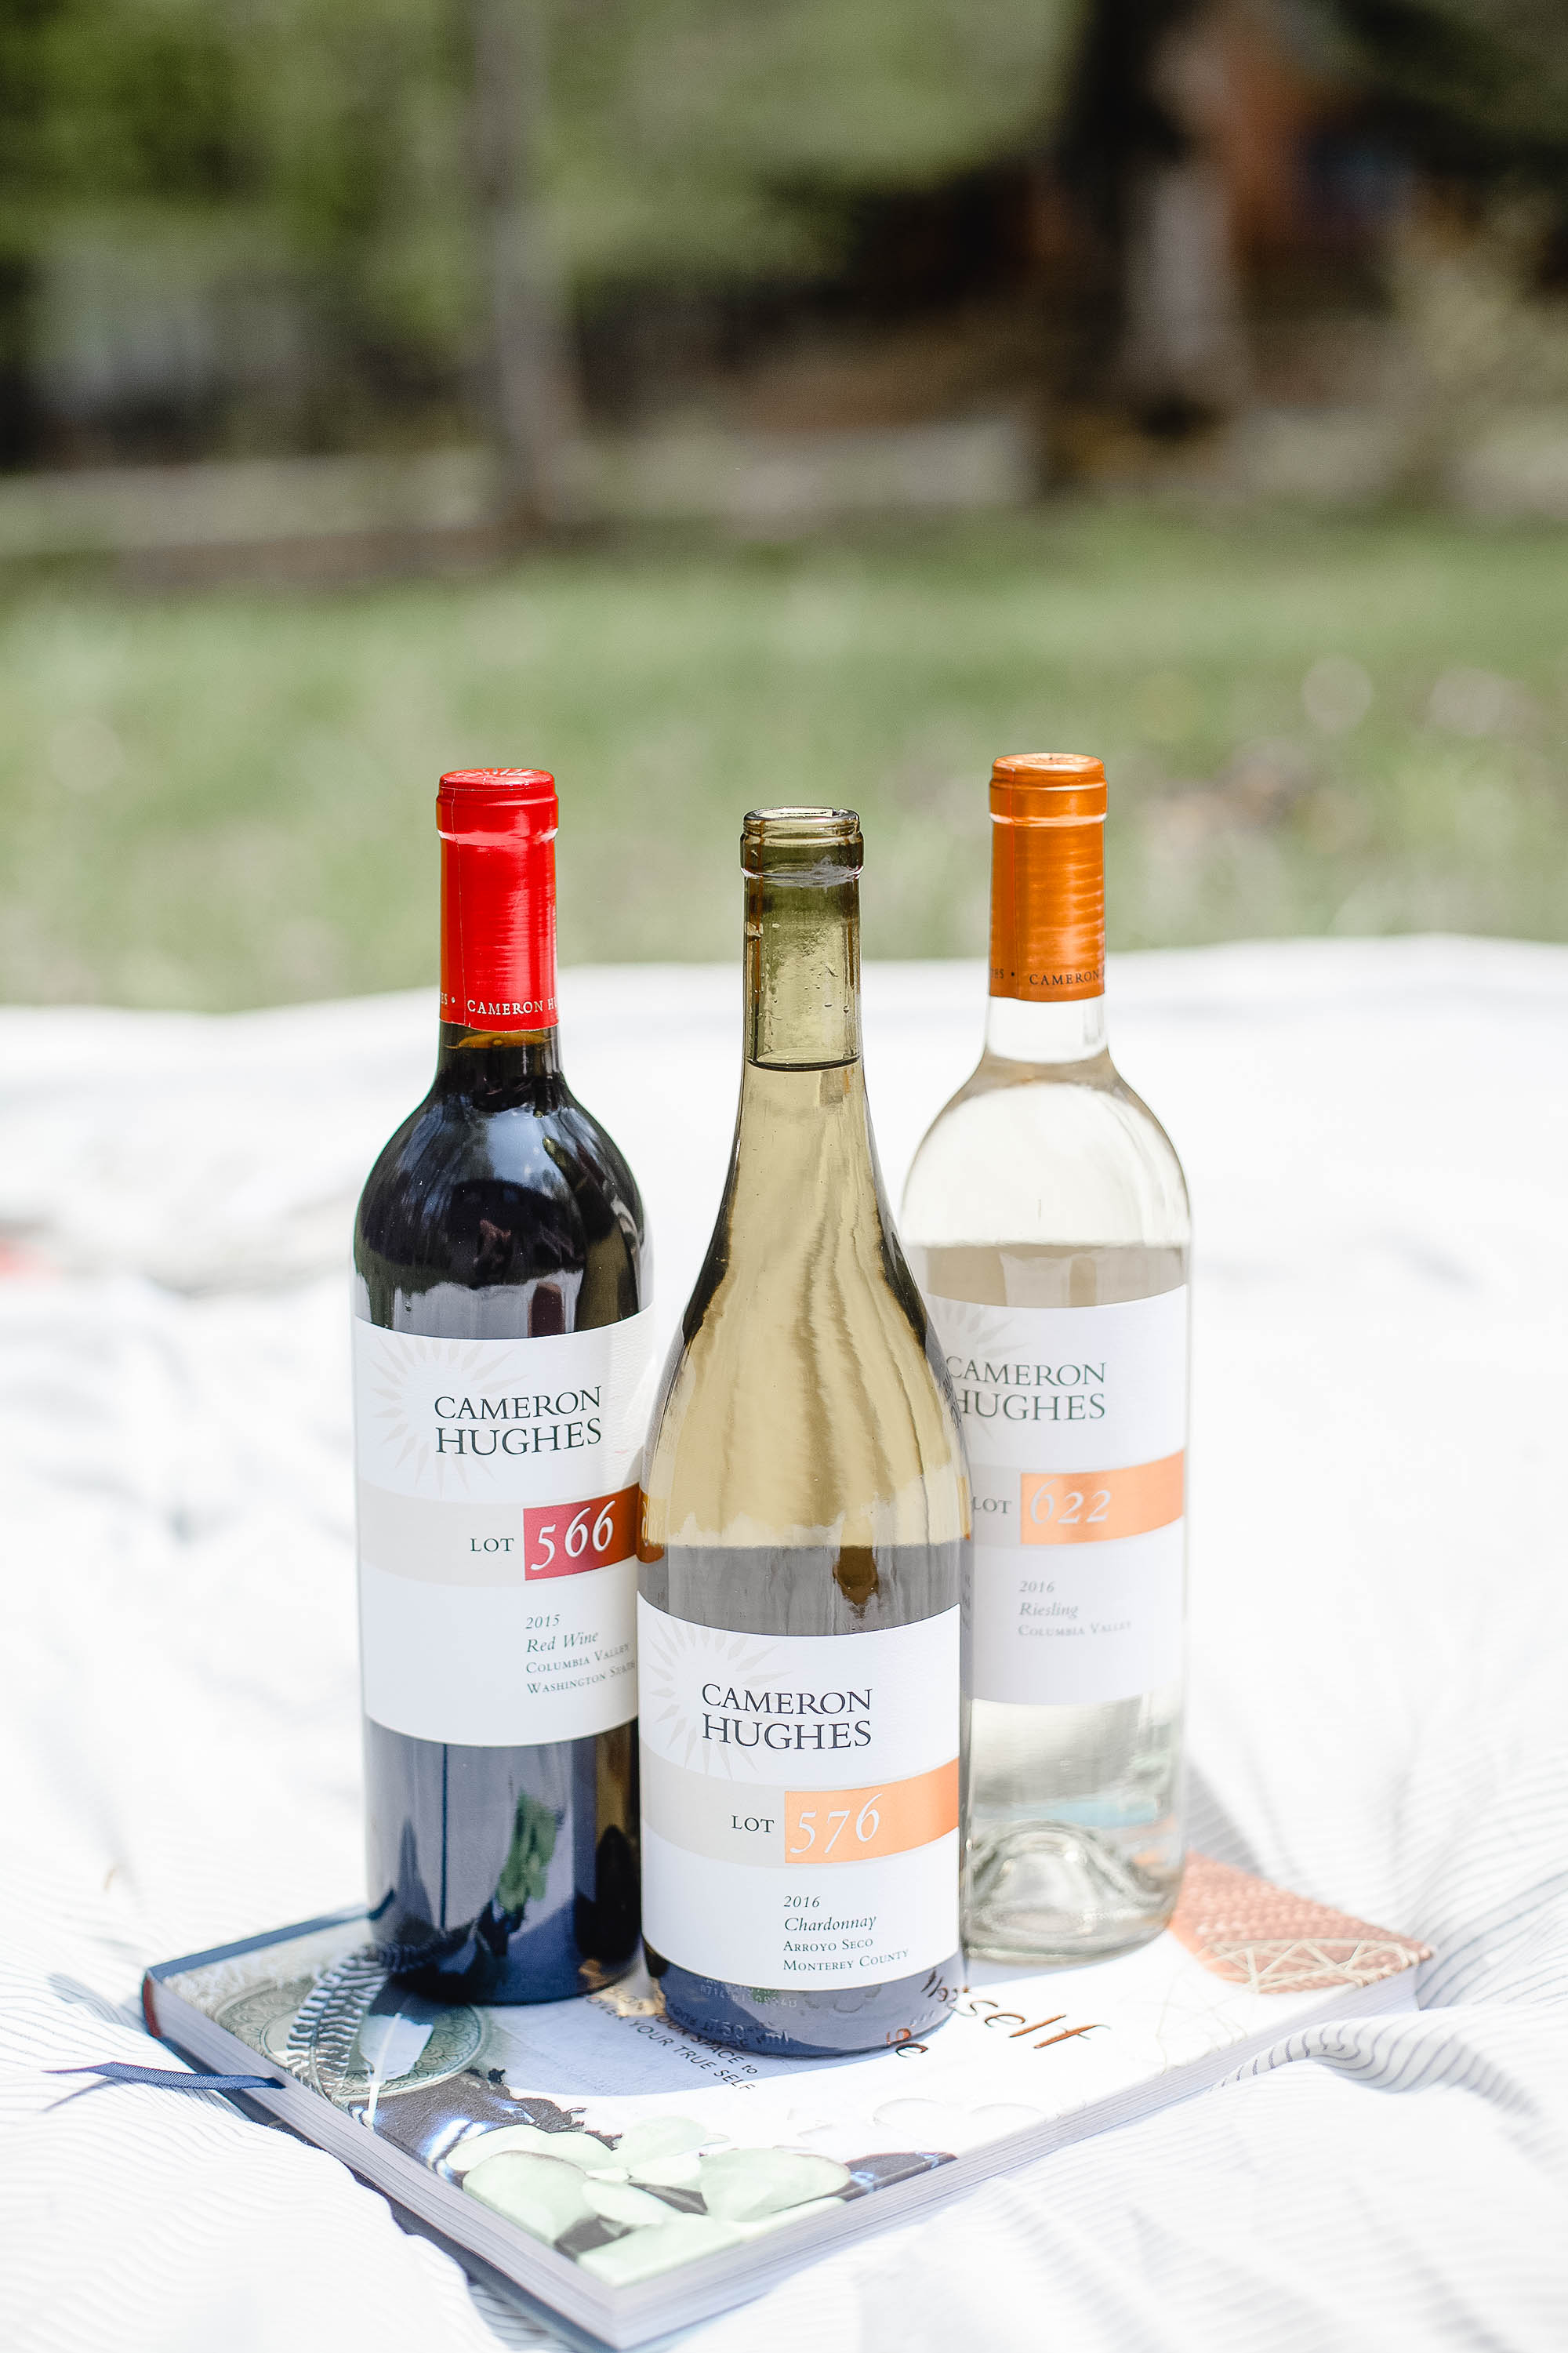 Three bottles of Cameron Hughes wine on a picnic blanket outdoors